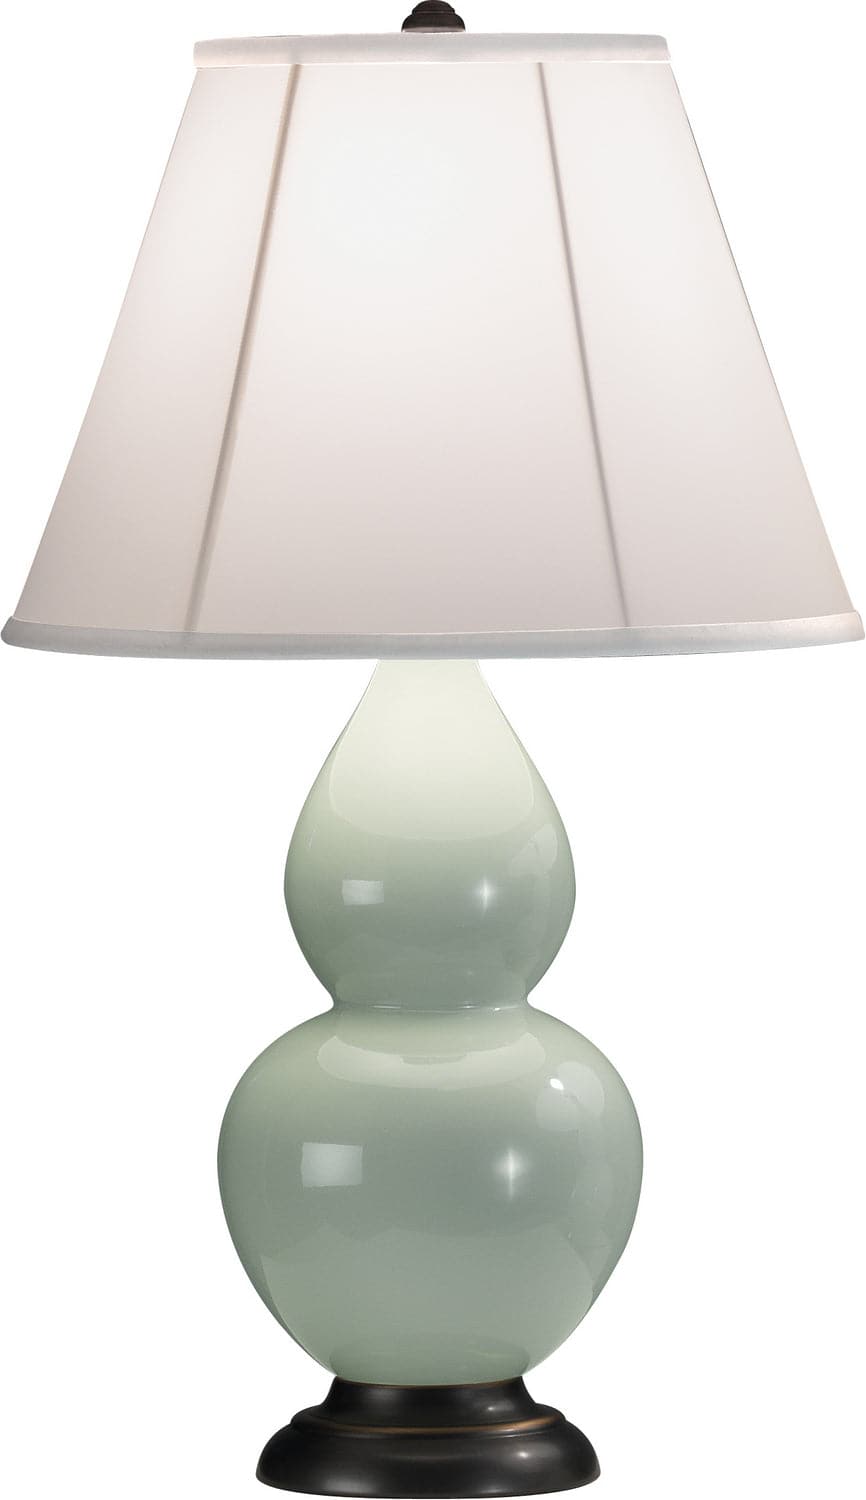 Robert Abbey - 1787 - One Light Accent Lamp - Small Double Gourd - Celadon Glazed